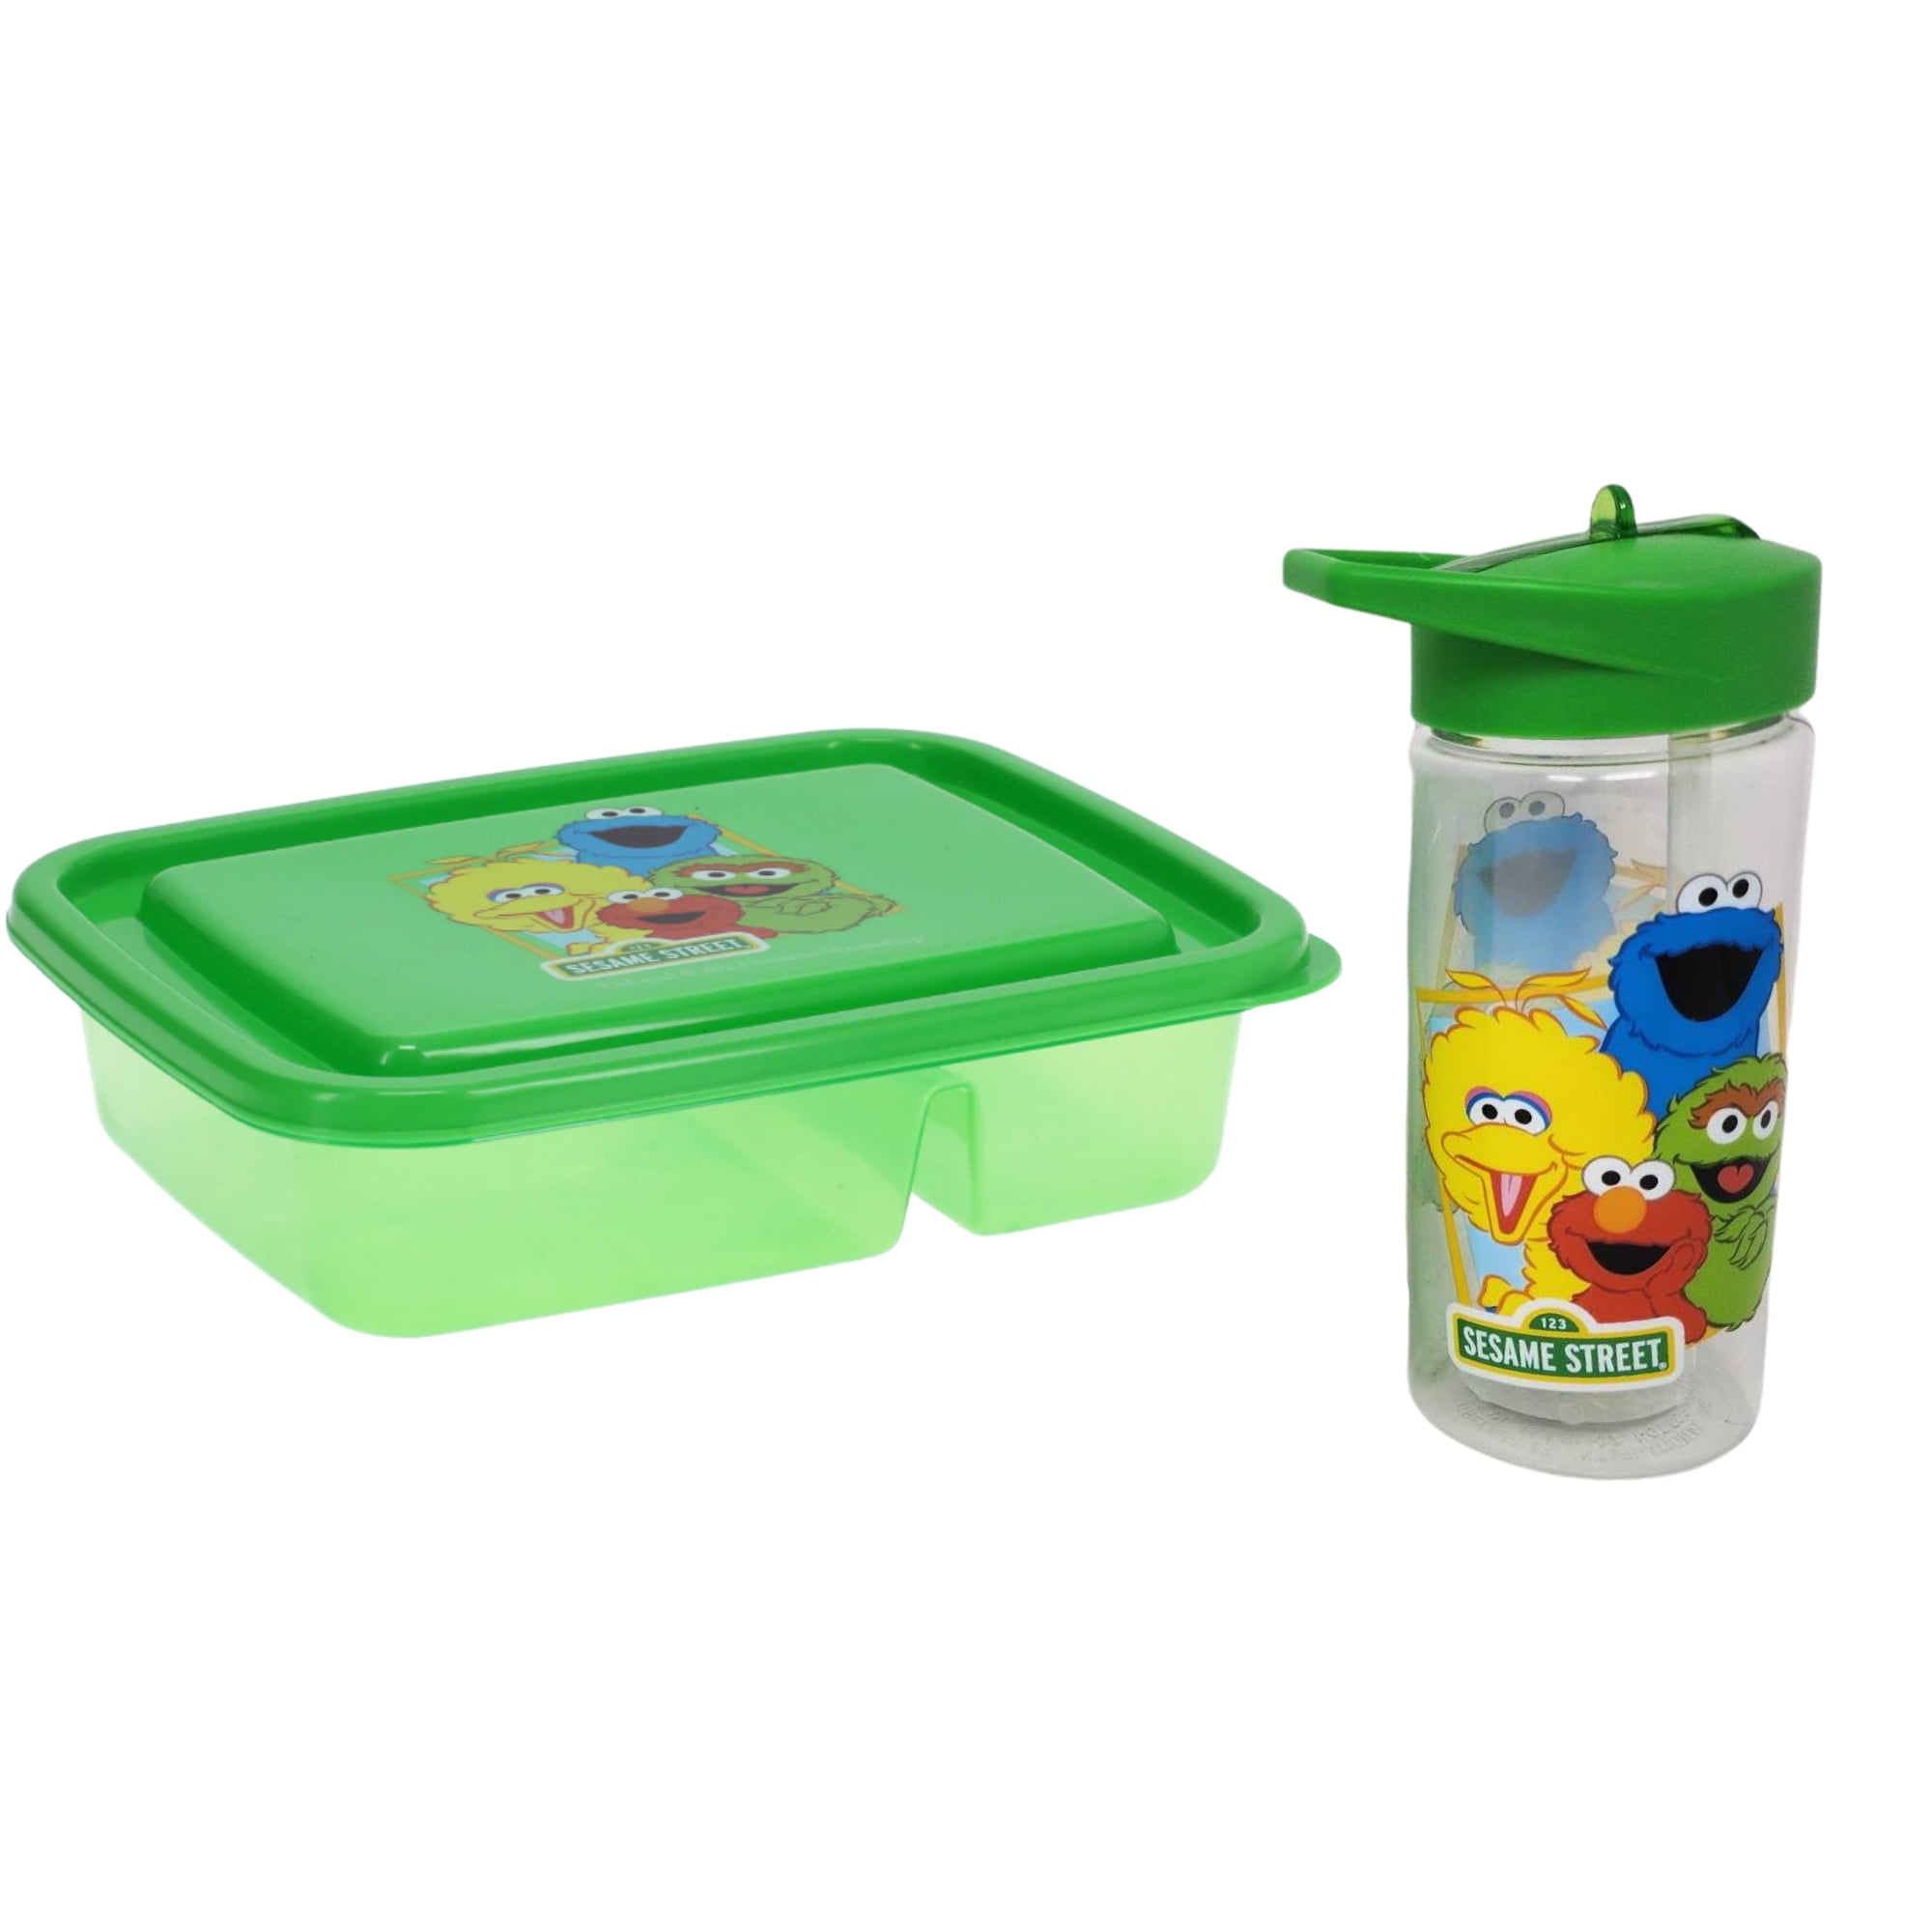 Munchkin® Lunch™ Bento Box for Kids, Includes Utensils, Green